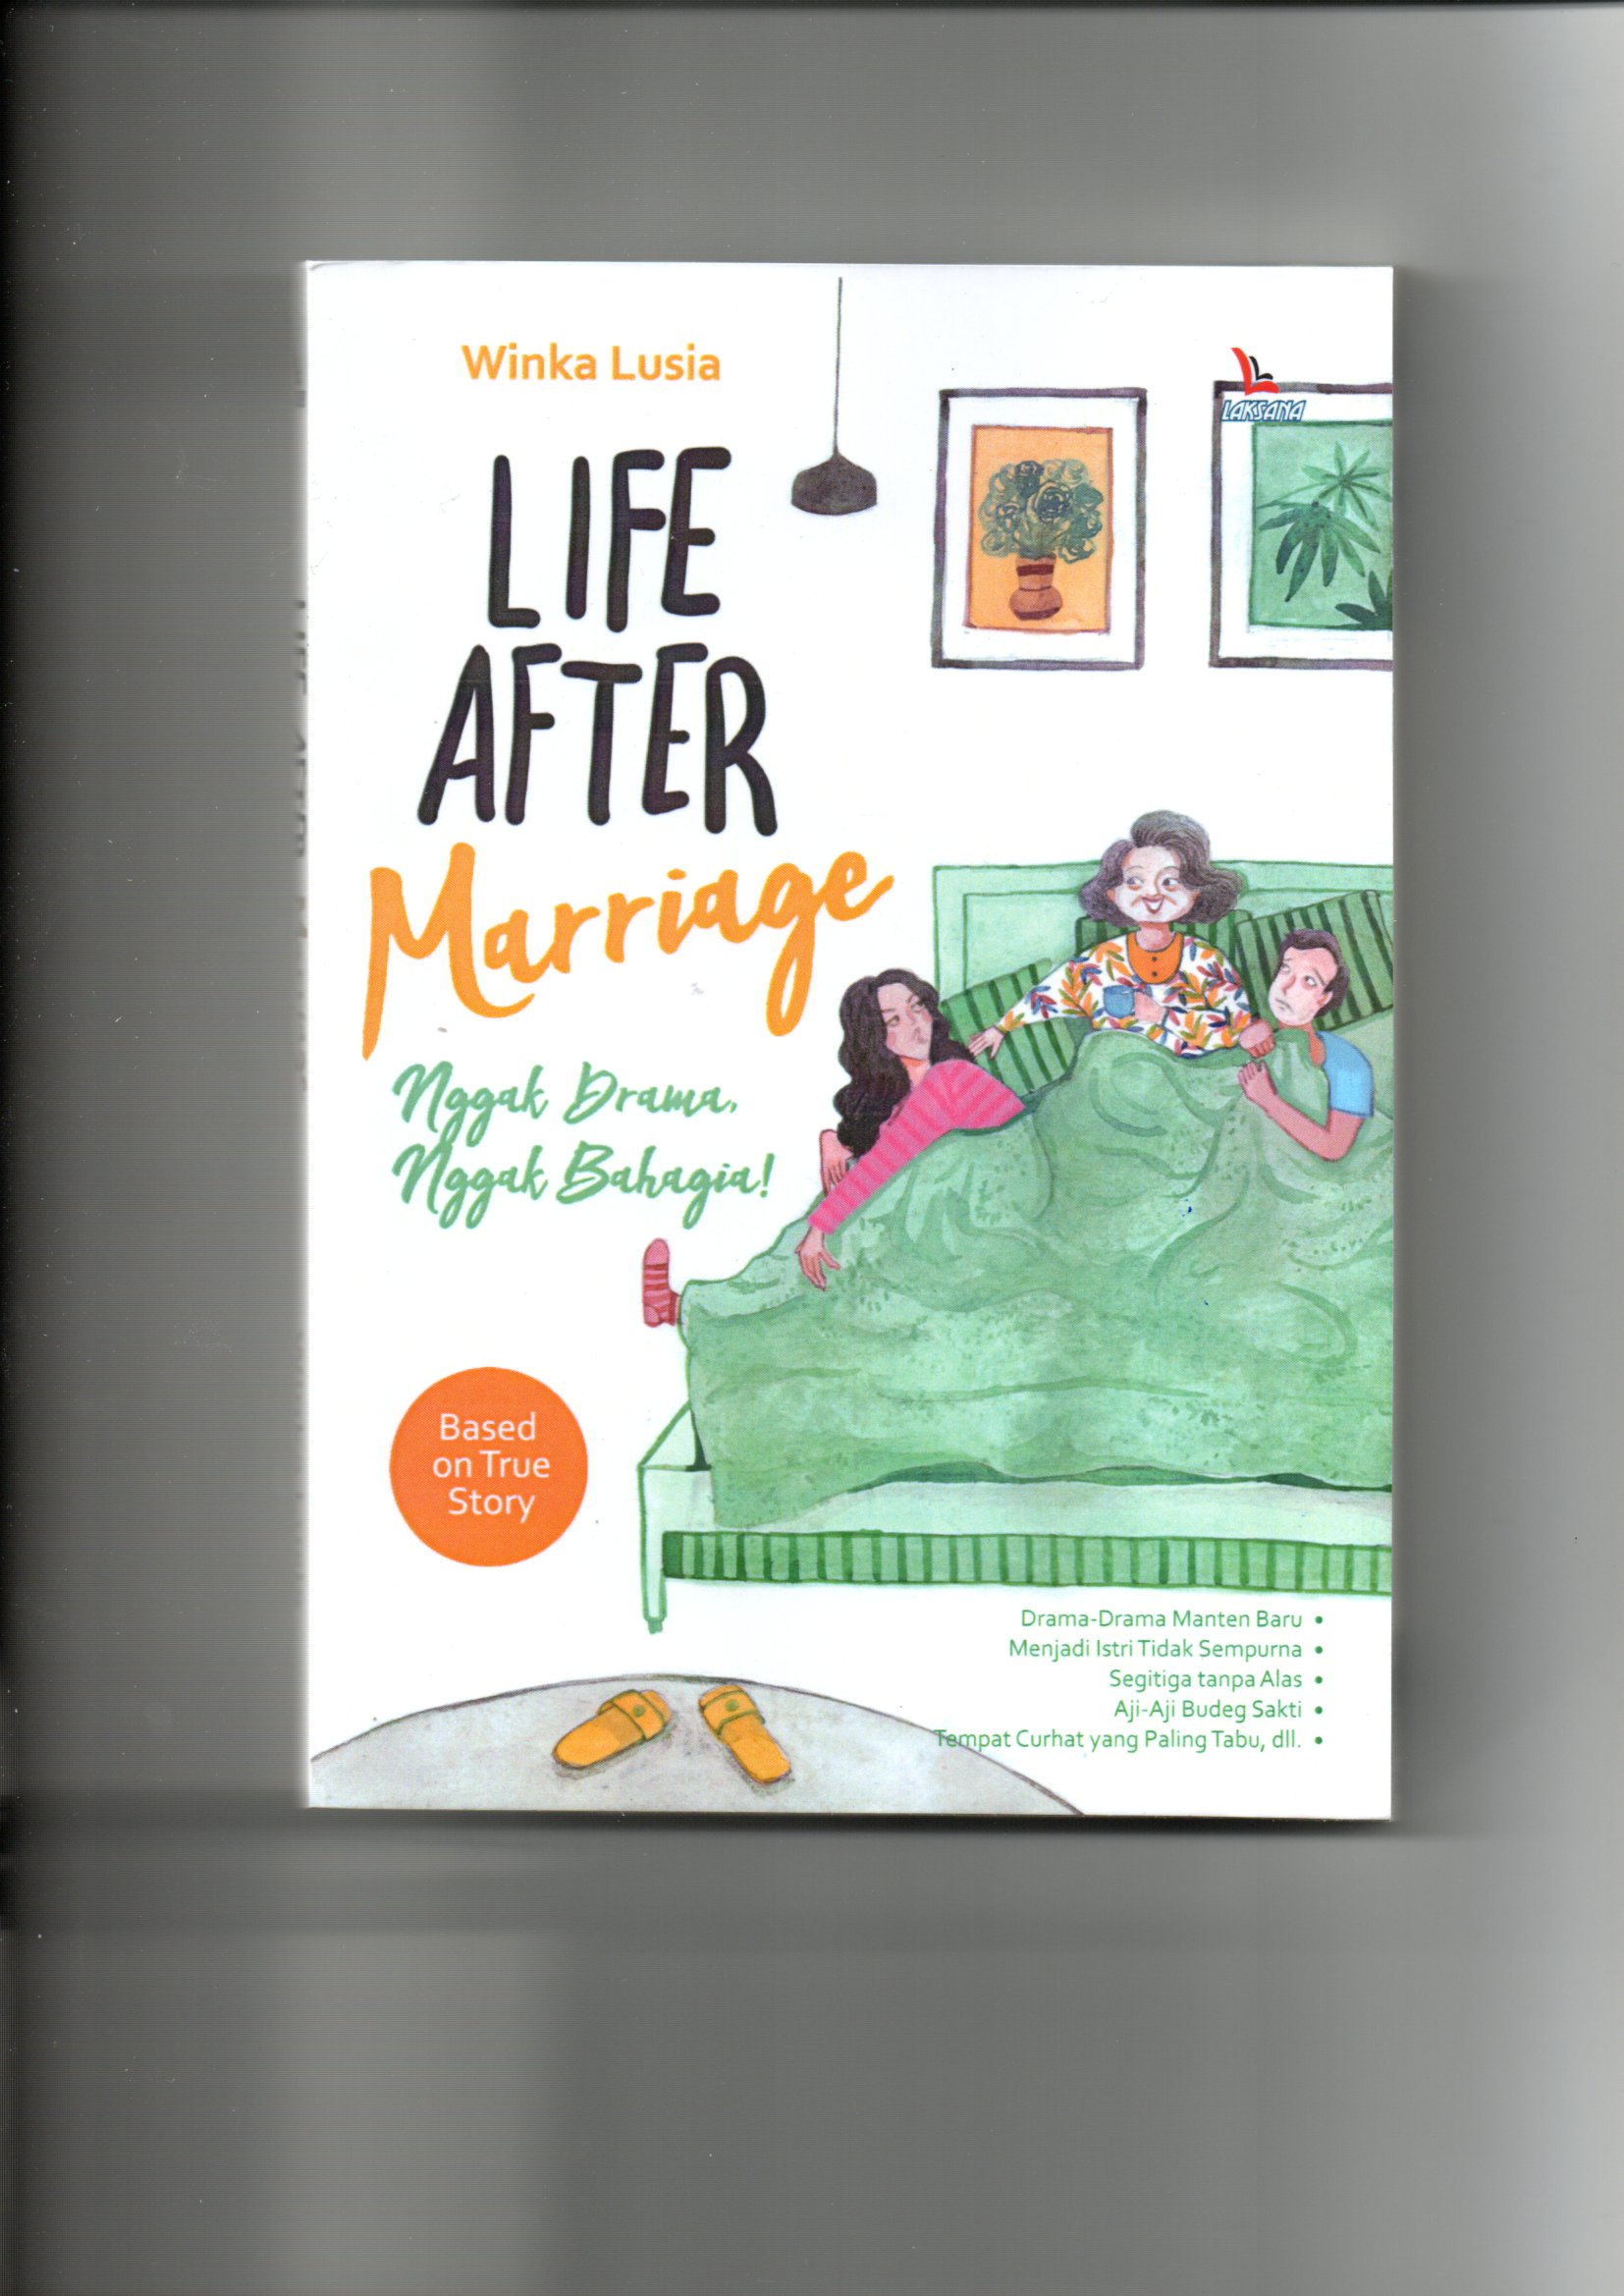 Life after marriage